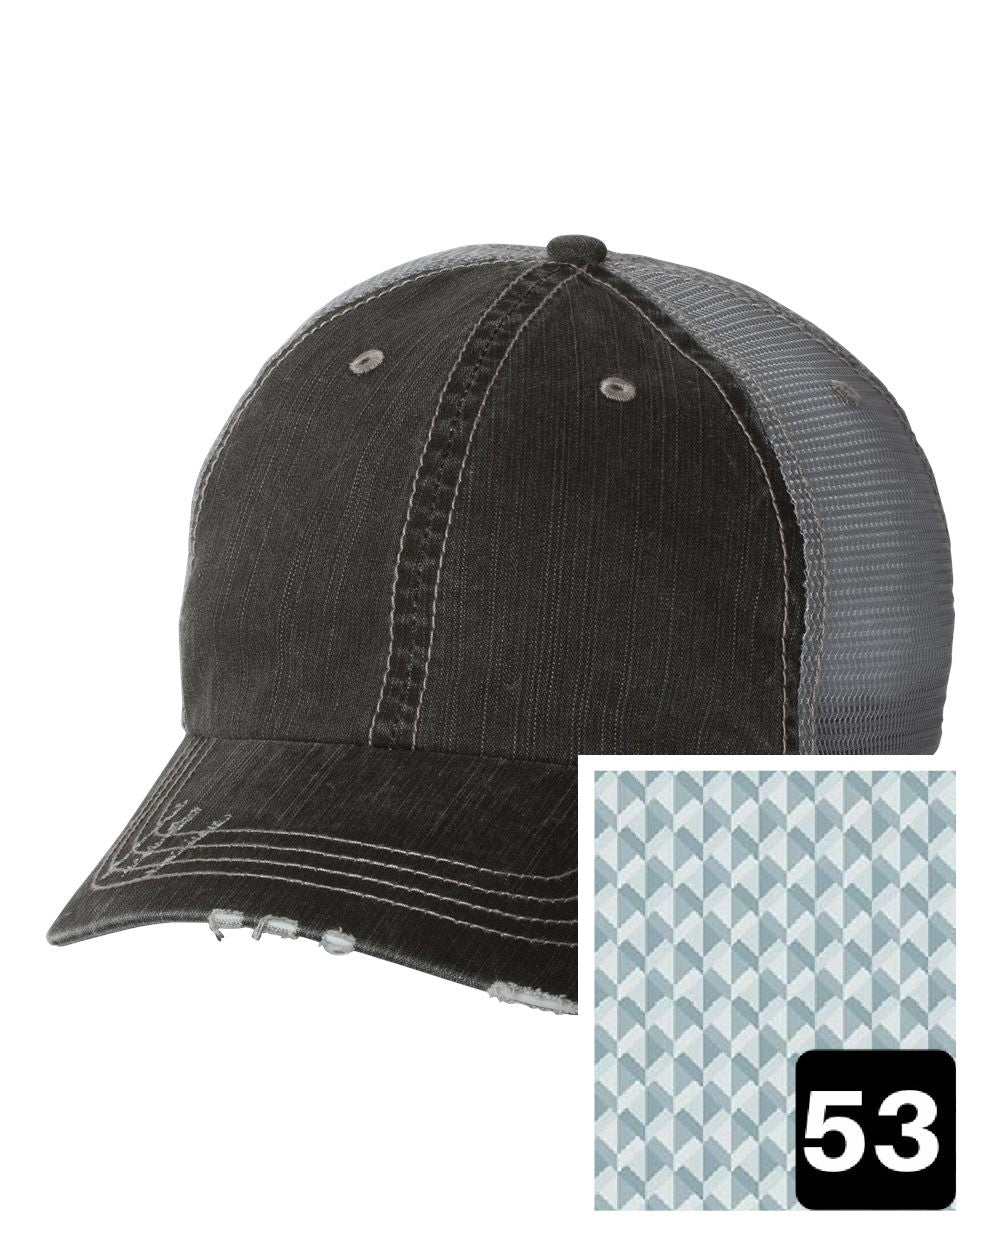 gray distressed trucker hat with multi-color stripe fabric state of Kansas